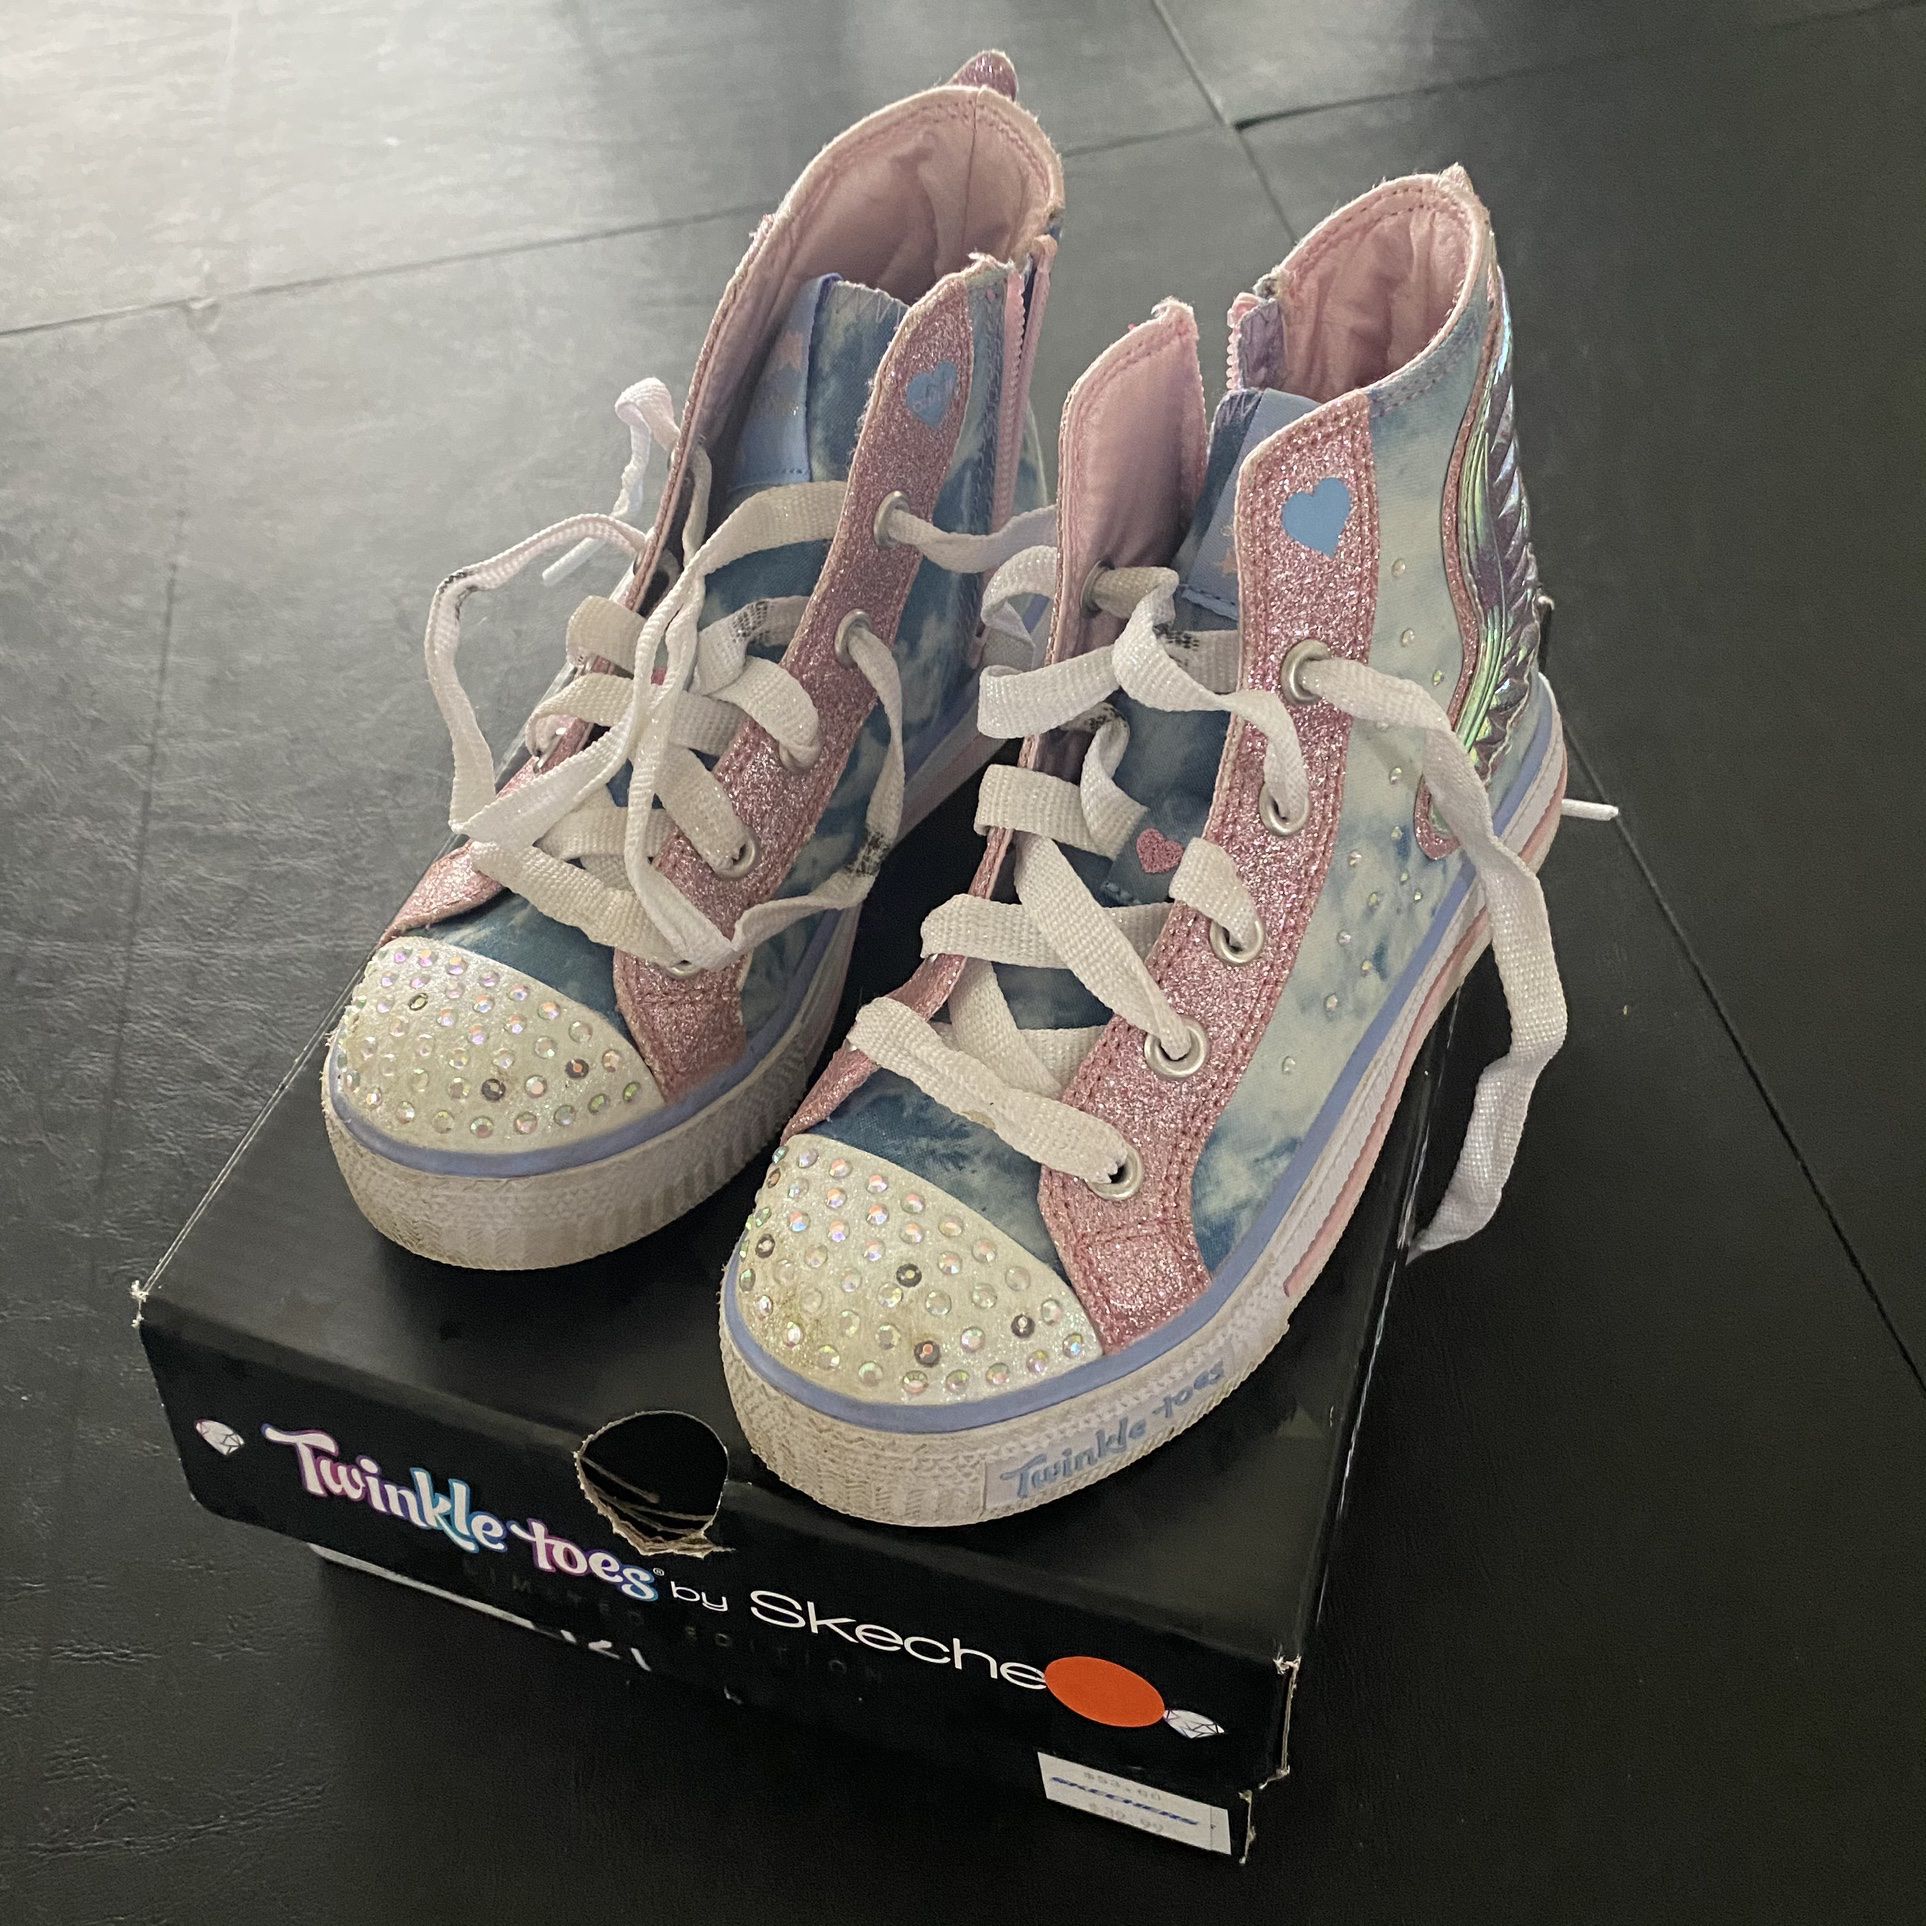 suizo Deber software Girl's Twinkle Toes Limited Edition by Skechers for Sale in Tacoma, WA -  OfferUp